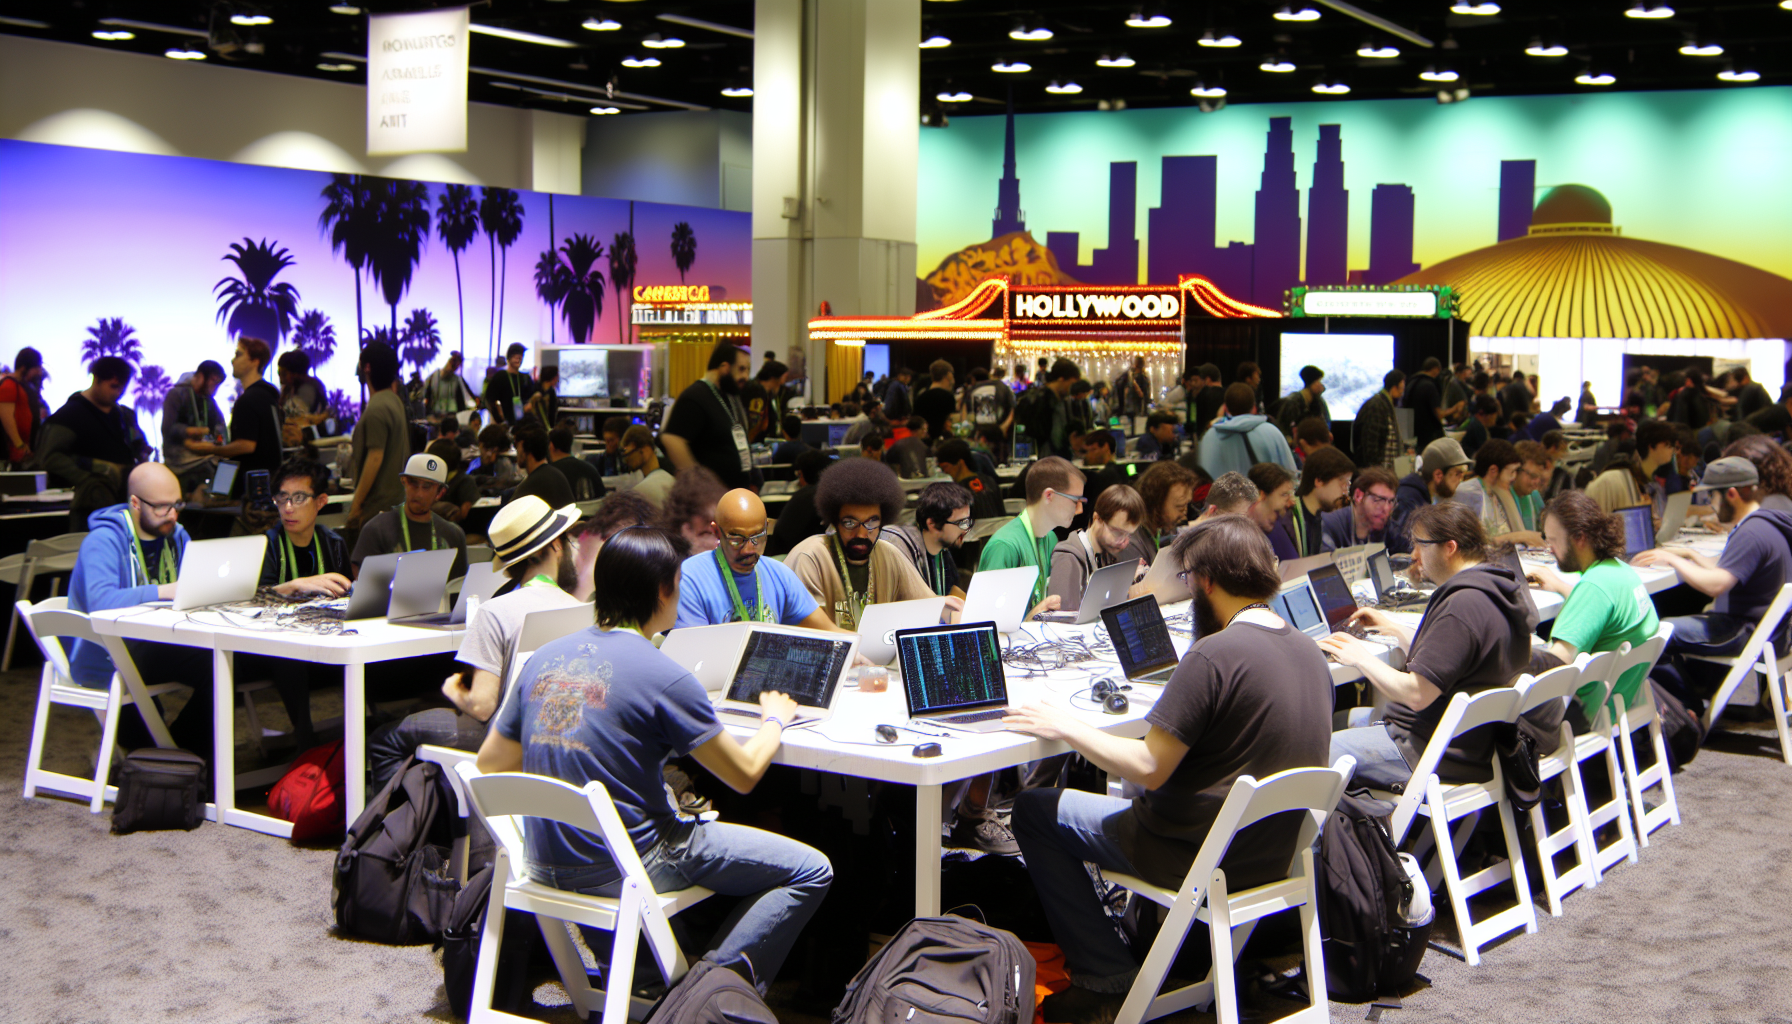 A vibrant game modding event in Los Angeles